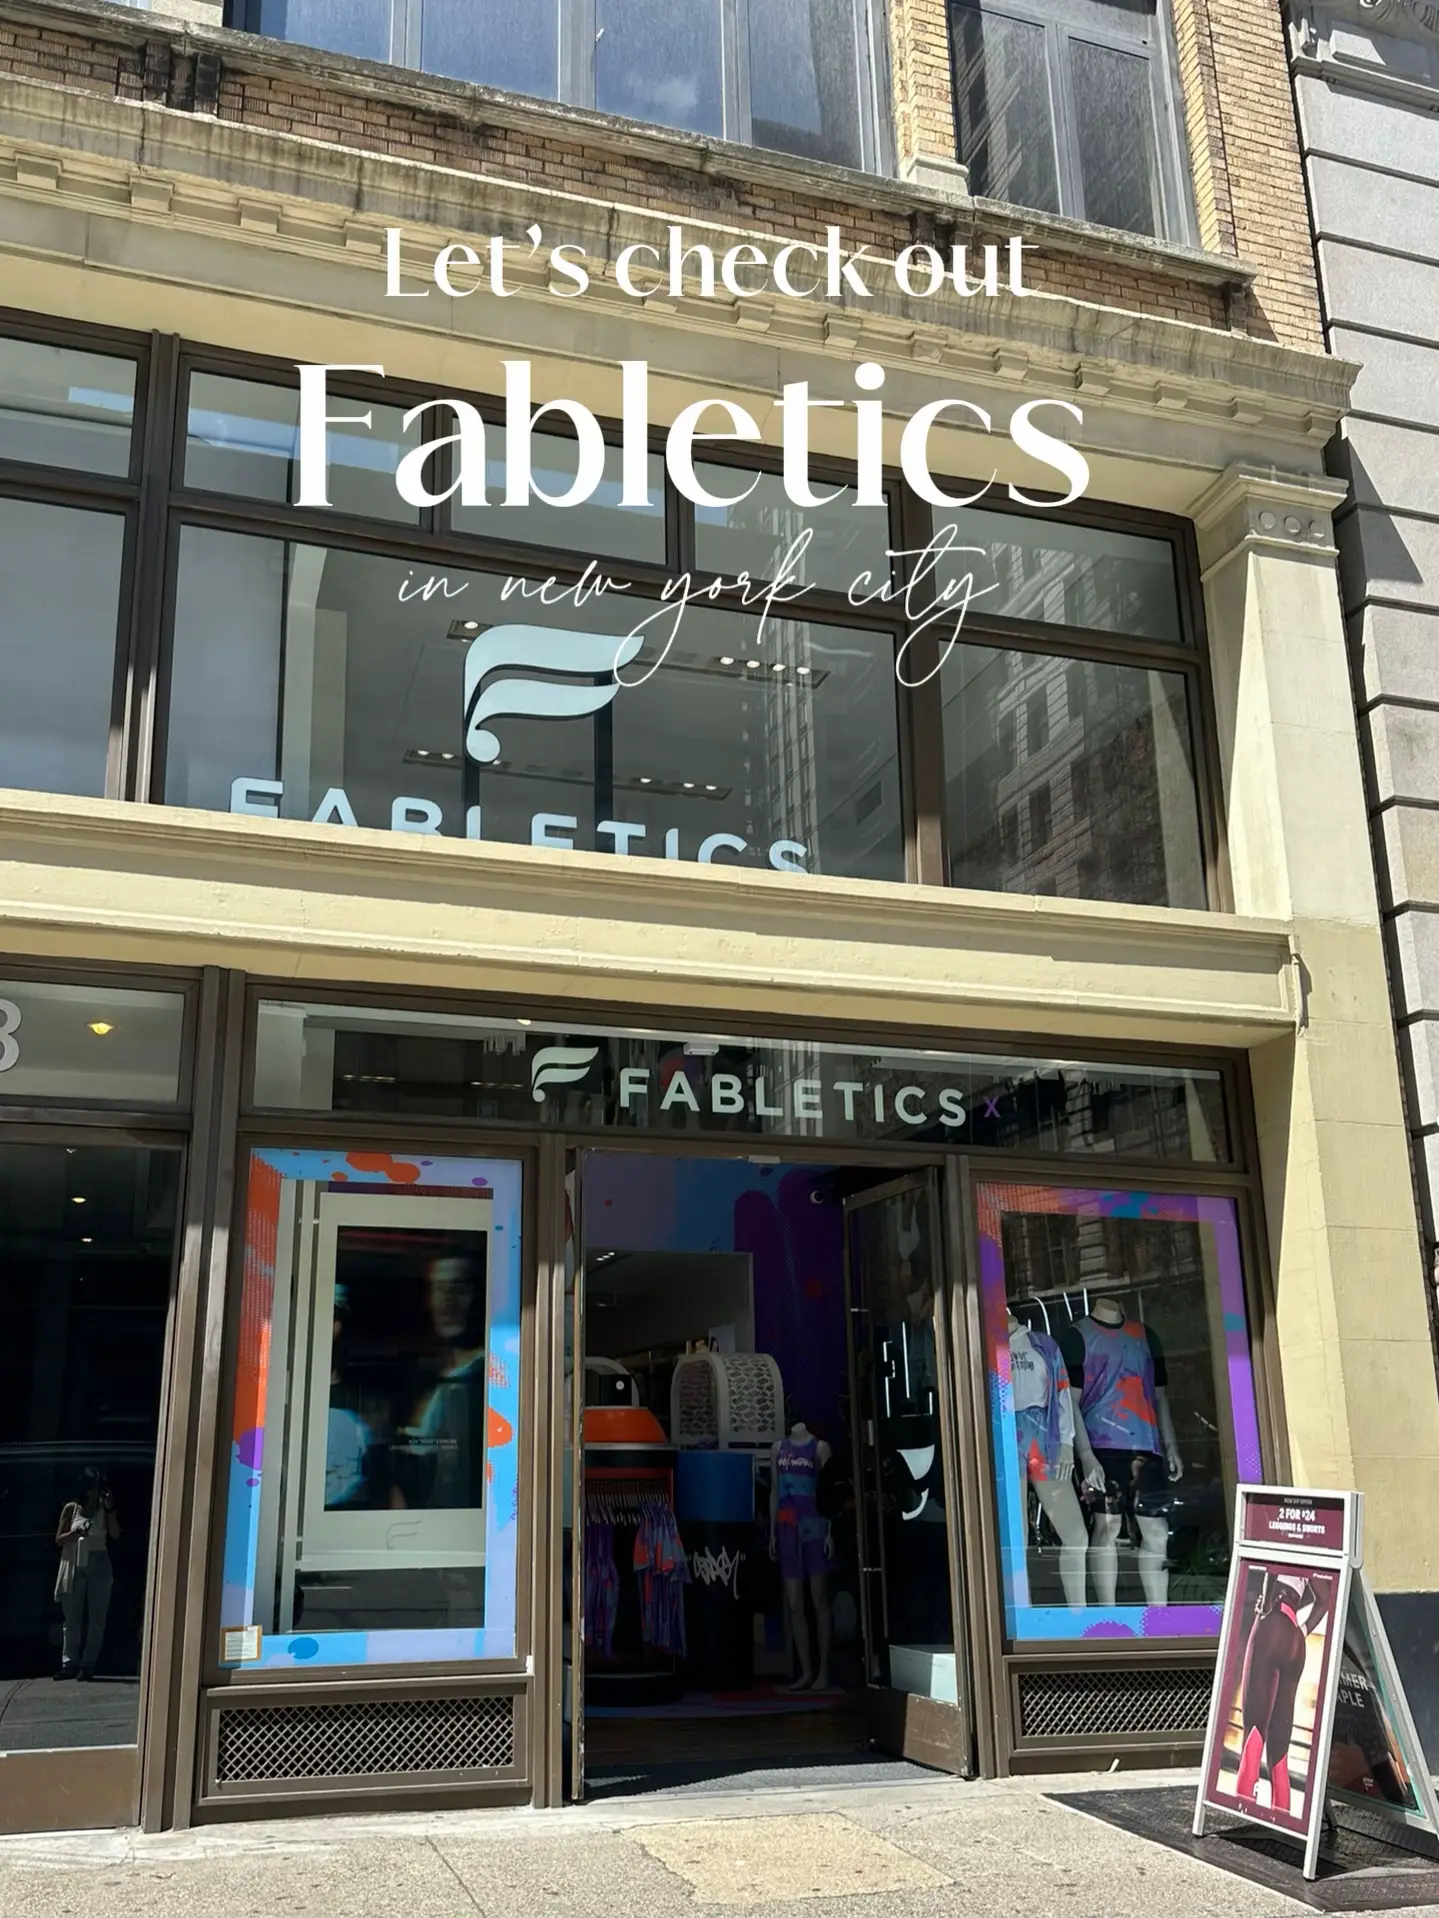 LET'S CHECK OUT FABLETICS IN NYC, Gallery posted by Valeria Redher